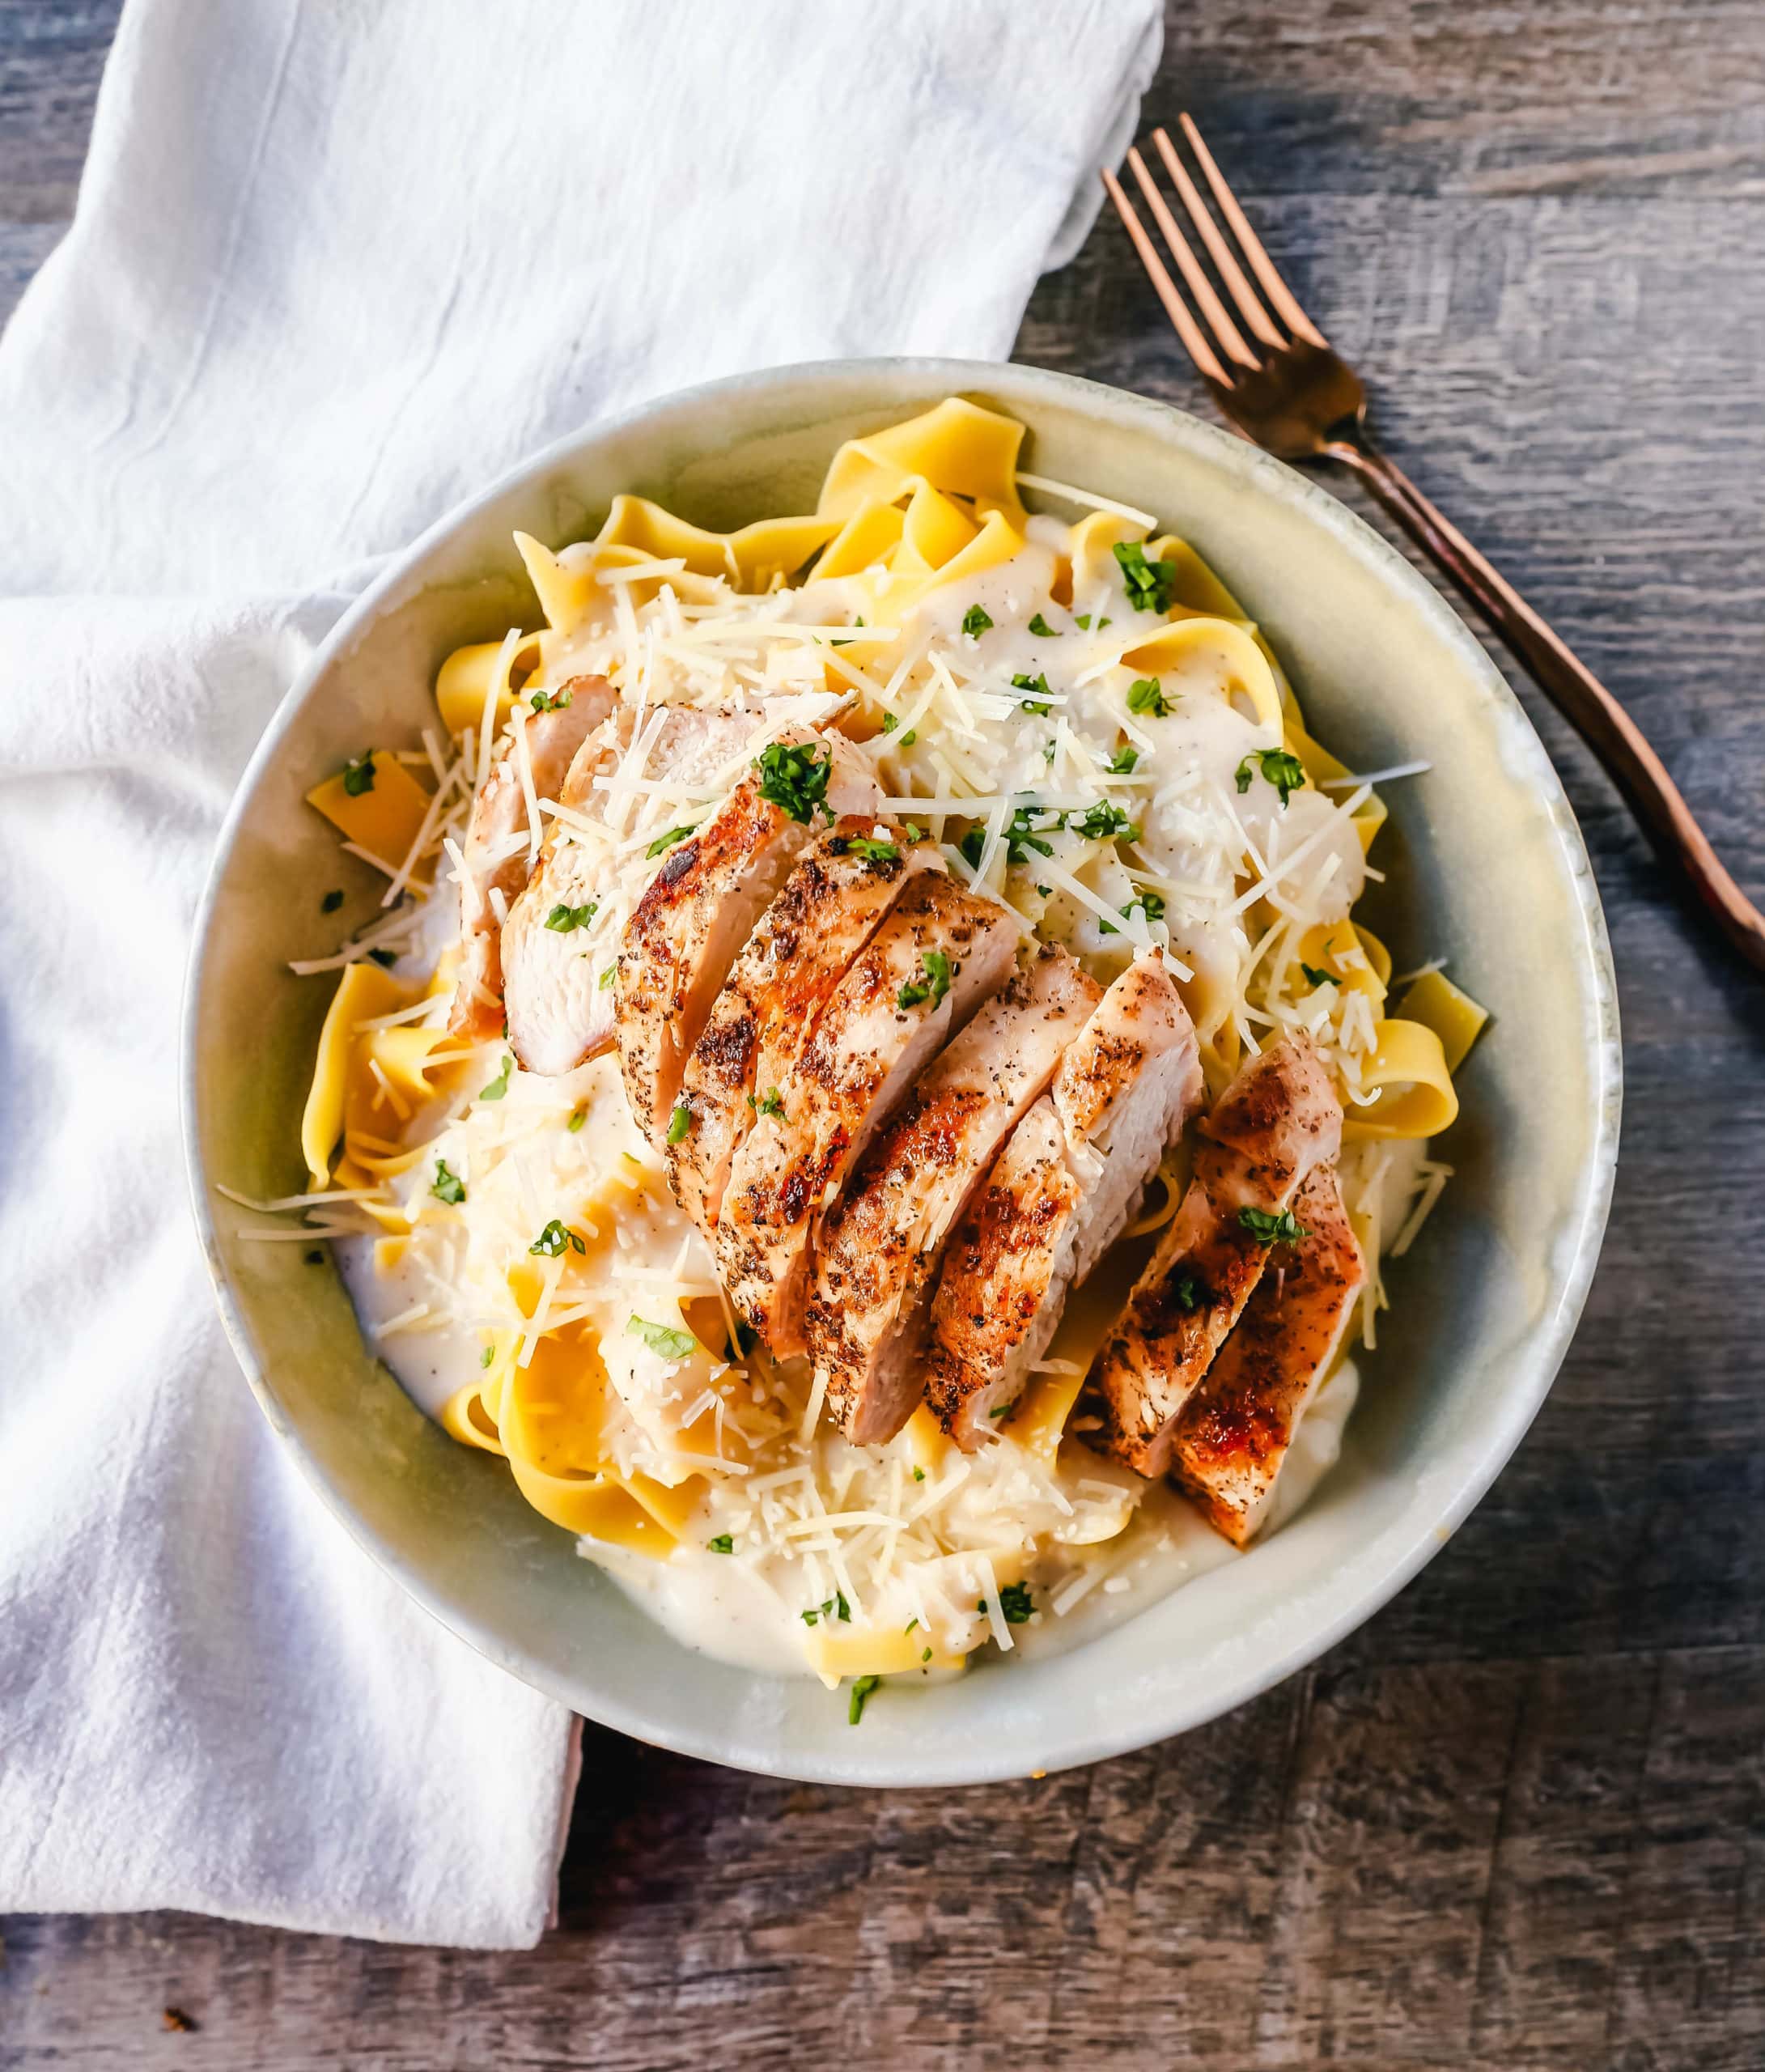 Skinny Low-Fat Chicken Fettuccine Alfredo All of the flavor of Chicken Fettuccine Alfredo without all of the fat and calories! Lean grilled chicken on top of low-fat alfredo sauce tossed with fettuccine noodles. www.modernhoney.com #lowfat #chicken #pasta